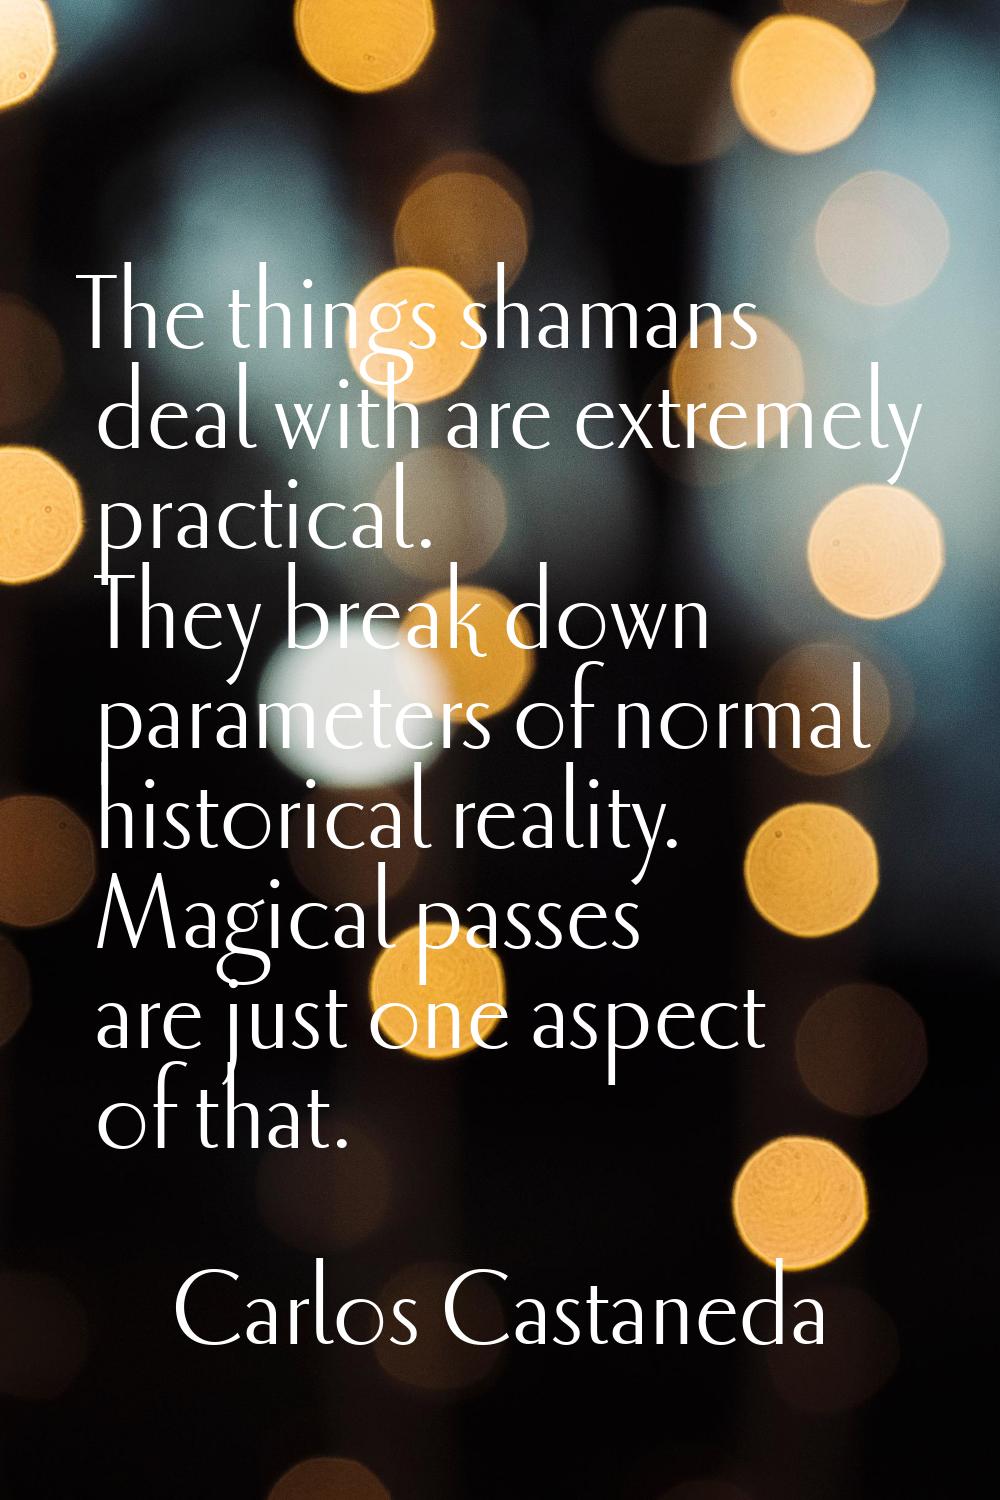 The things shamans deal with are extremely practical. They break down parameters of normal historic